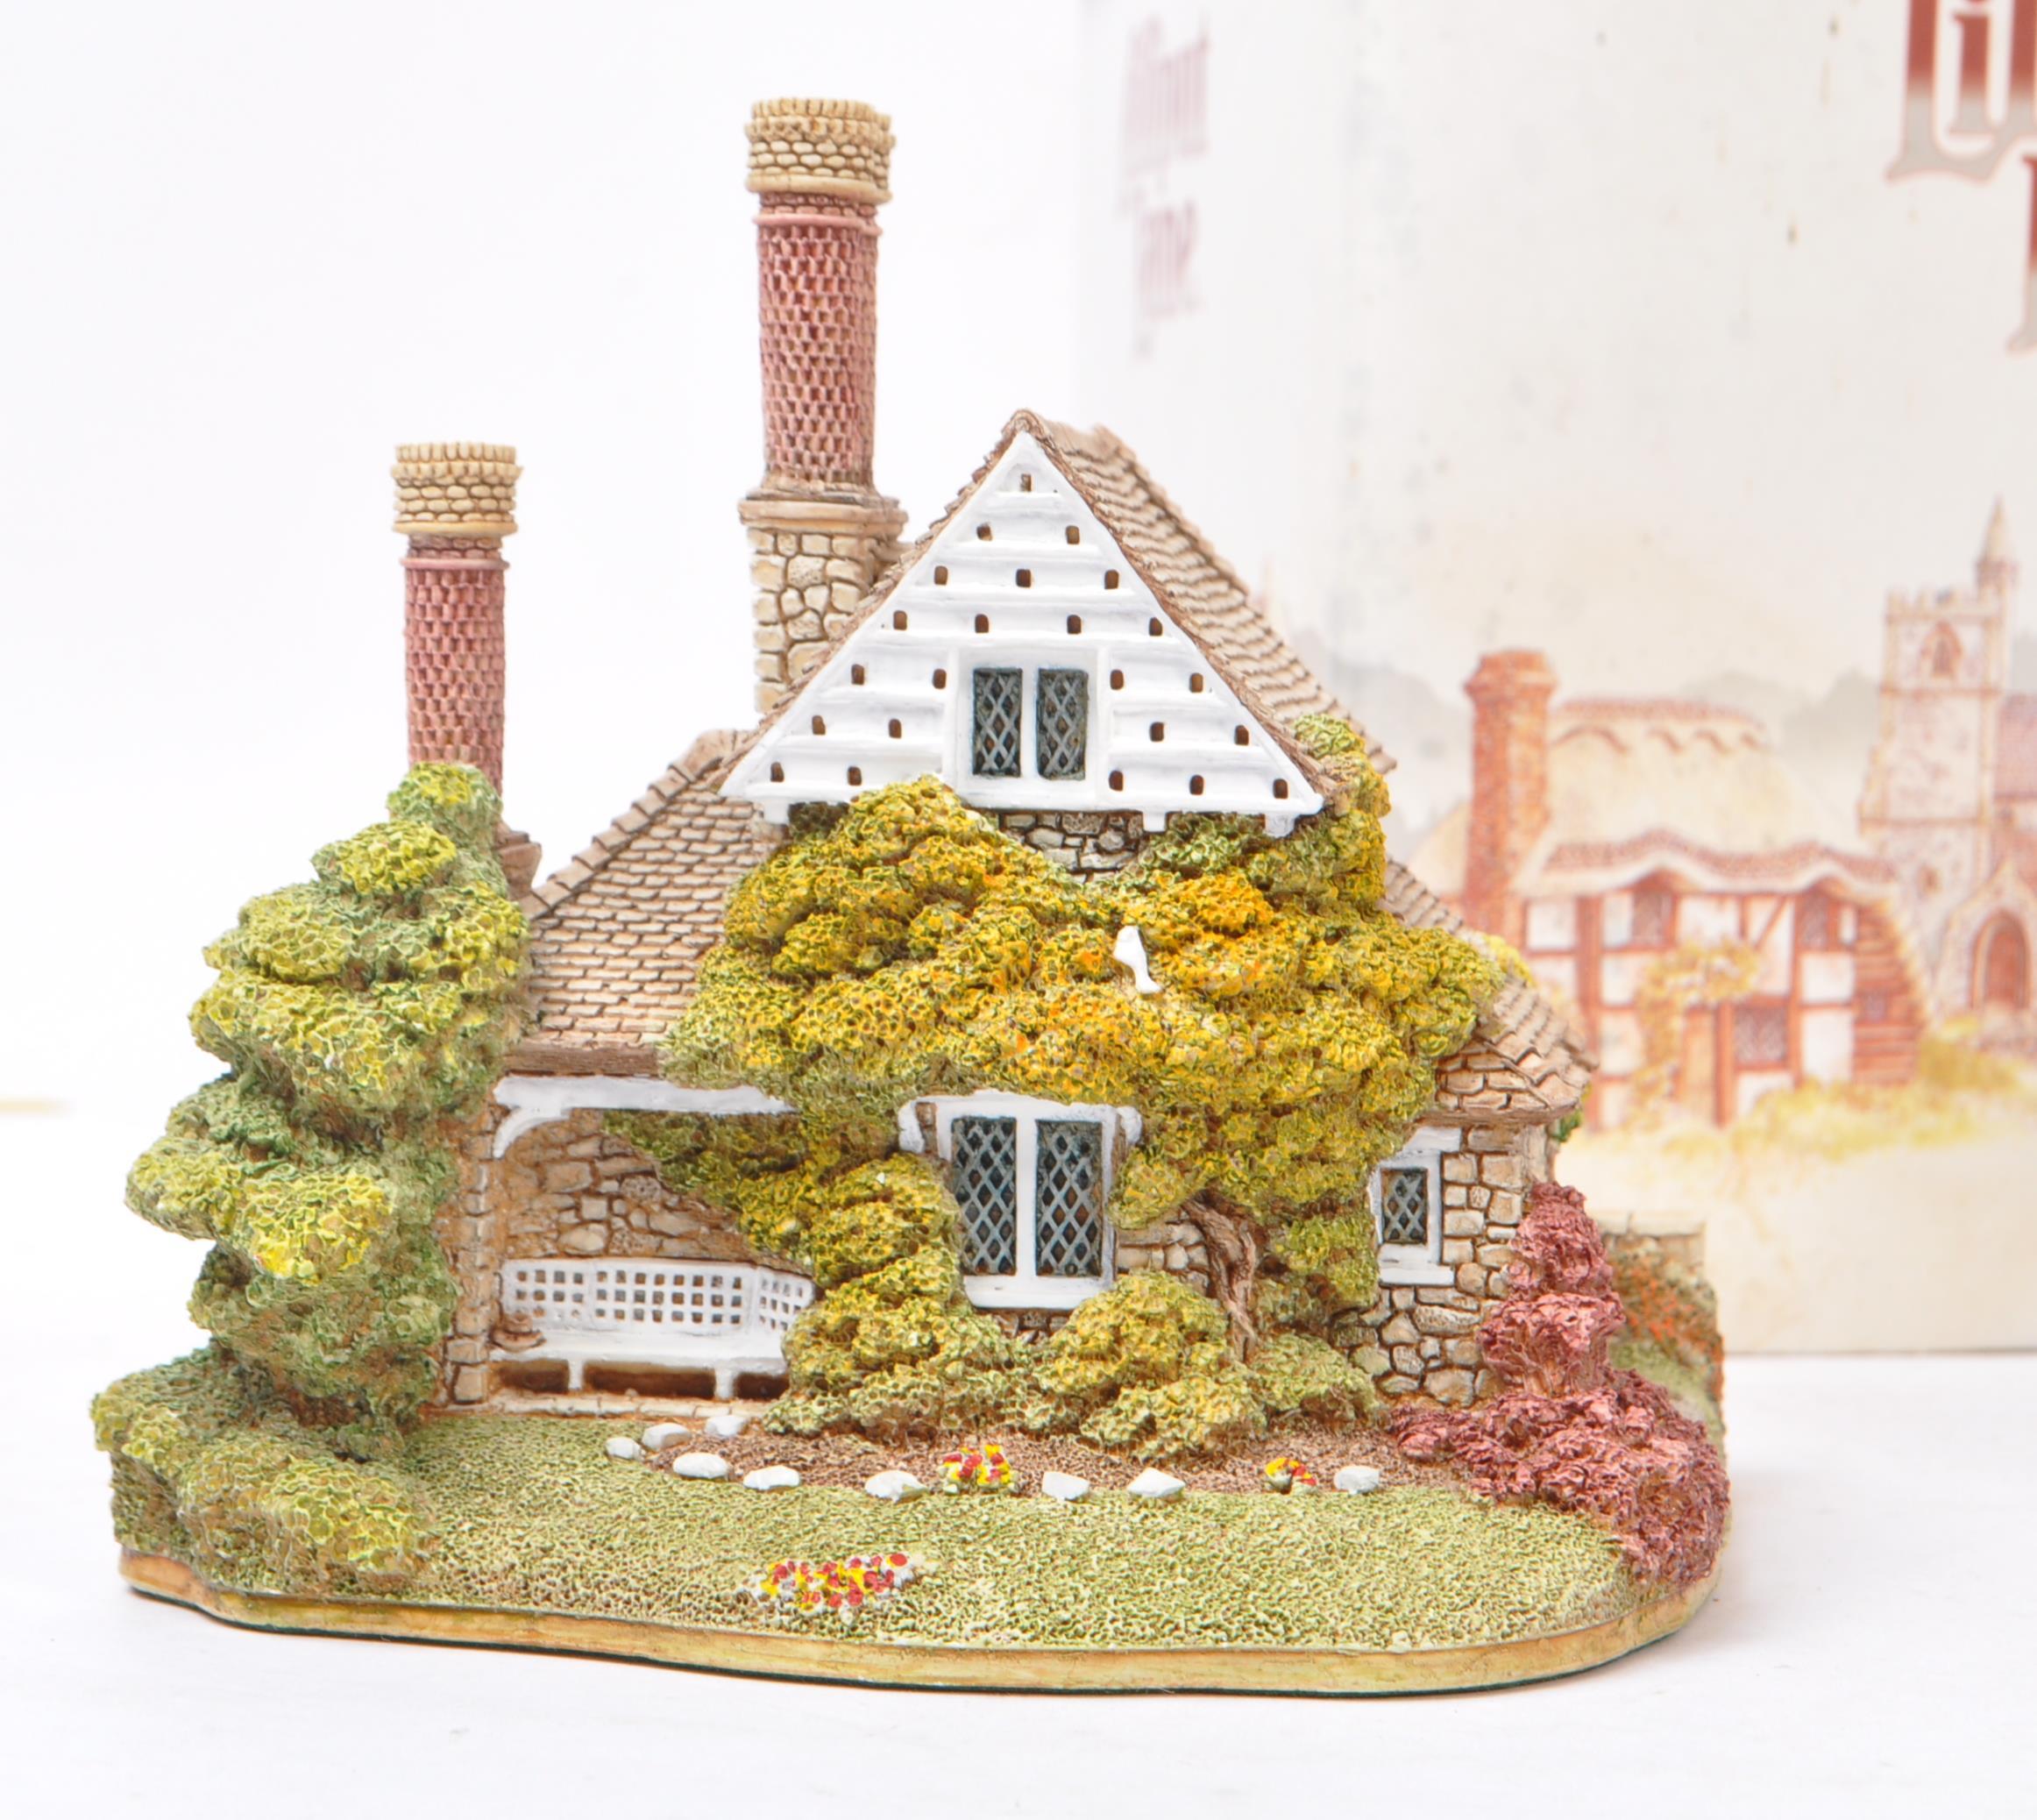 LILLIPUT LANE - COLLECTION OF HOUSE / COTTAGE RESIN FIGURINES - Image 3 of 9